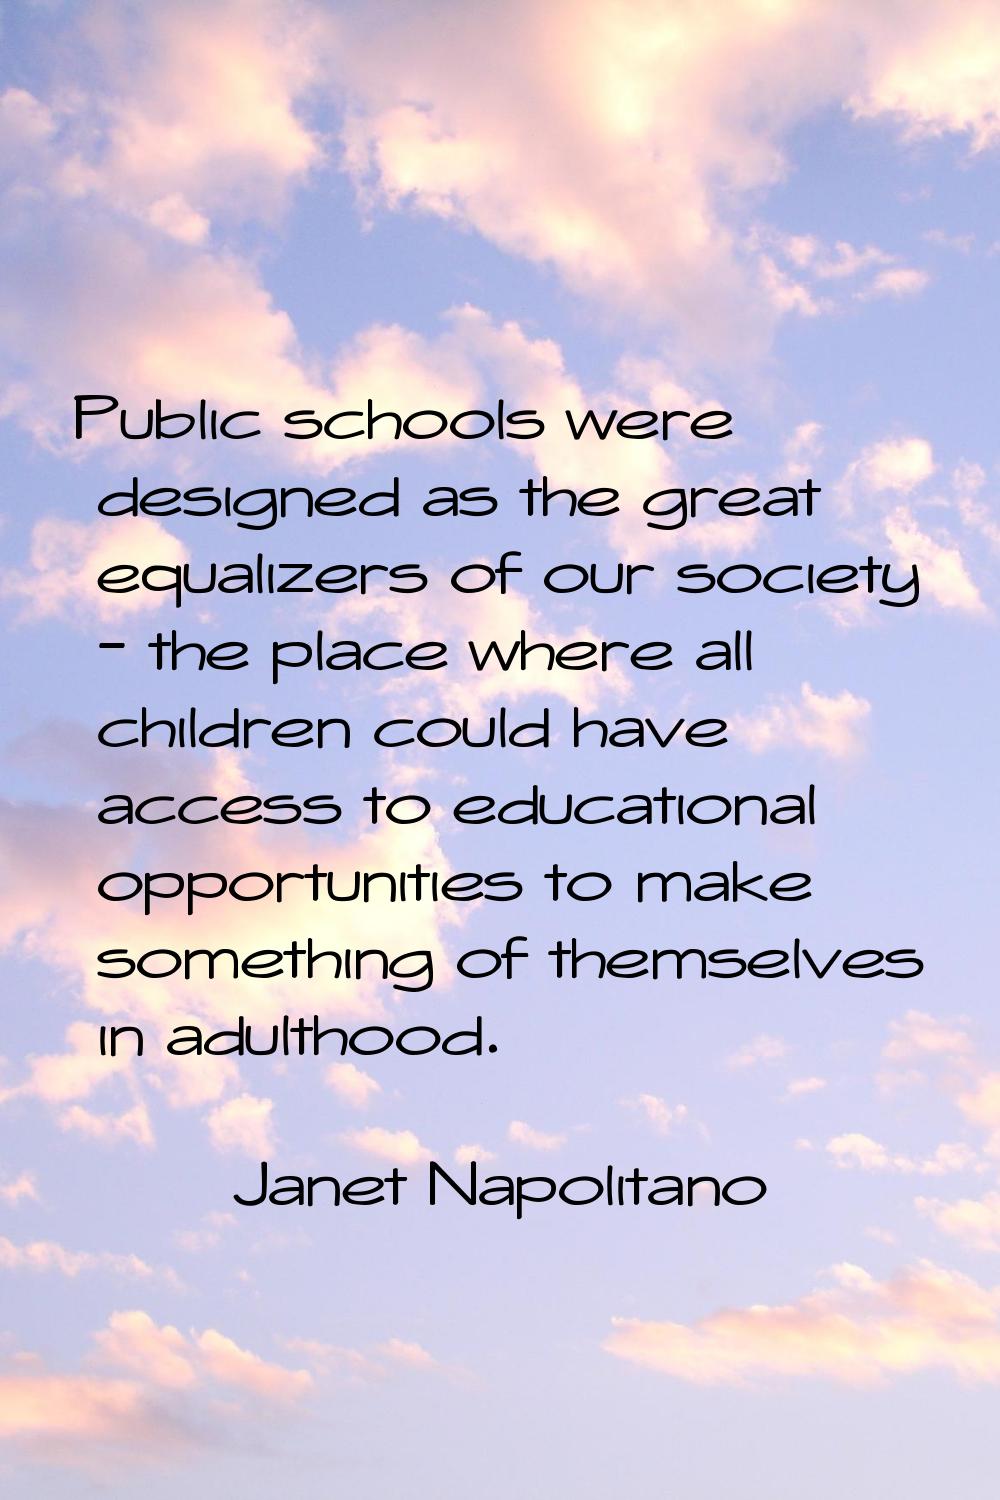 Public schools were designed as the great equalizers of our society - the place where all children 